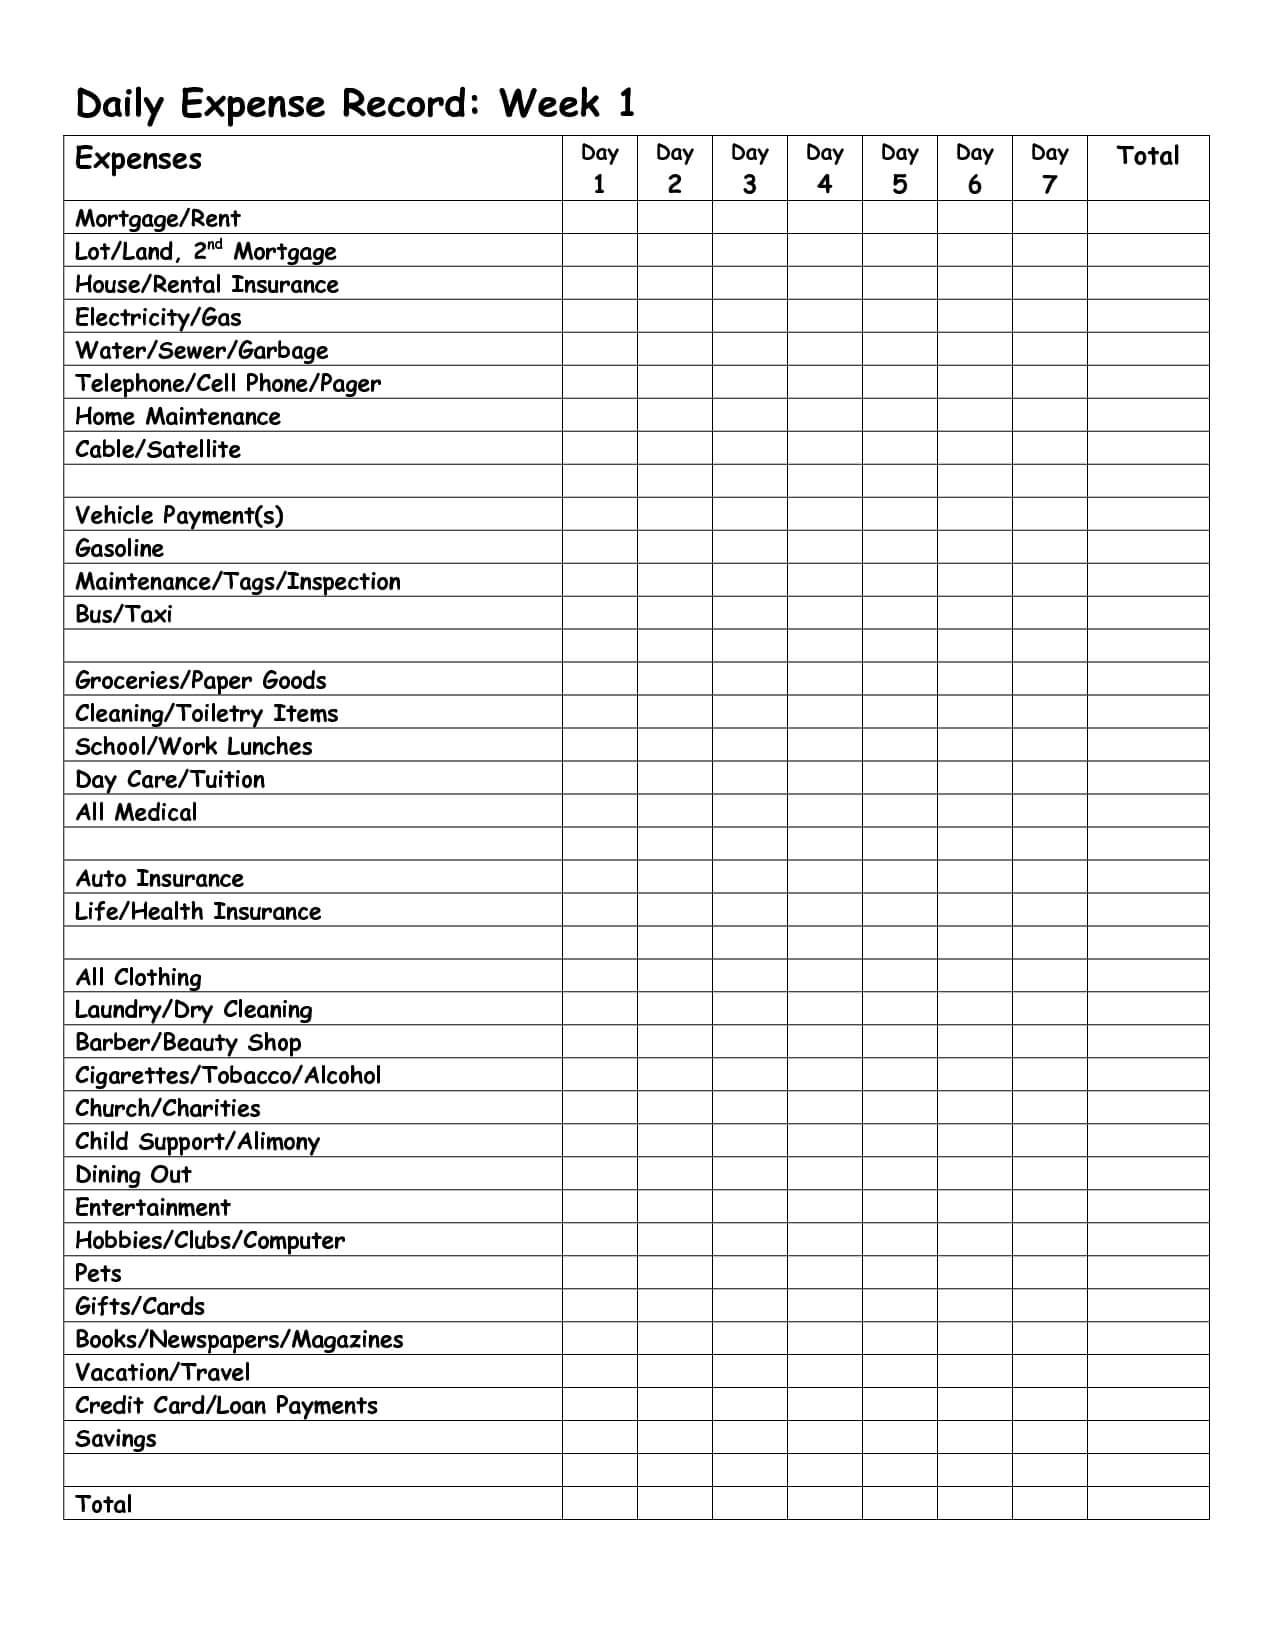 Monthly Expense Report Template | Daily Expense Record Week Inside Daily Expense Report Template